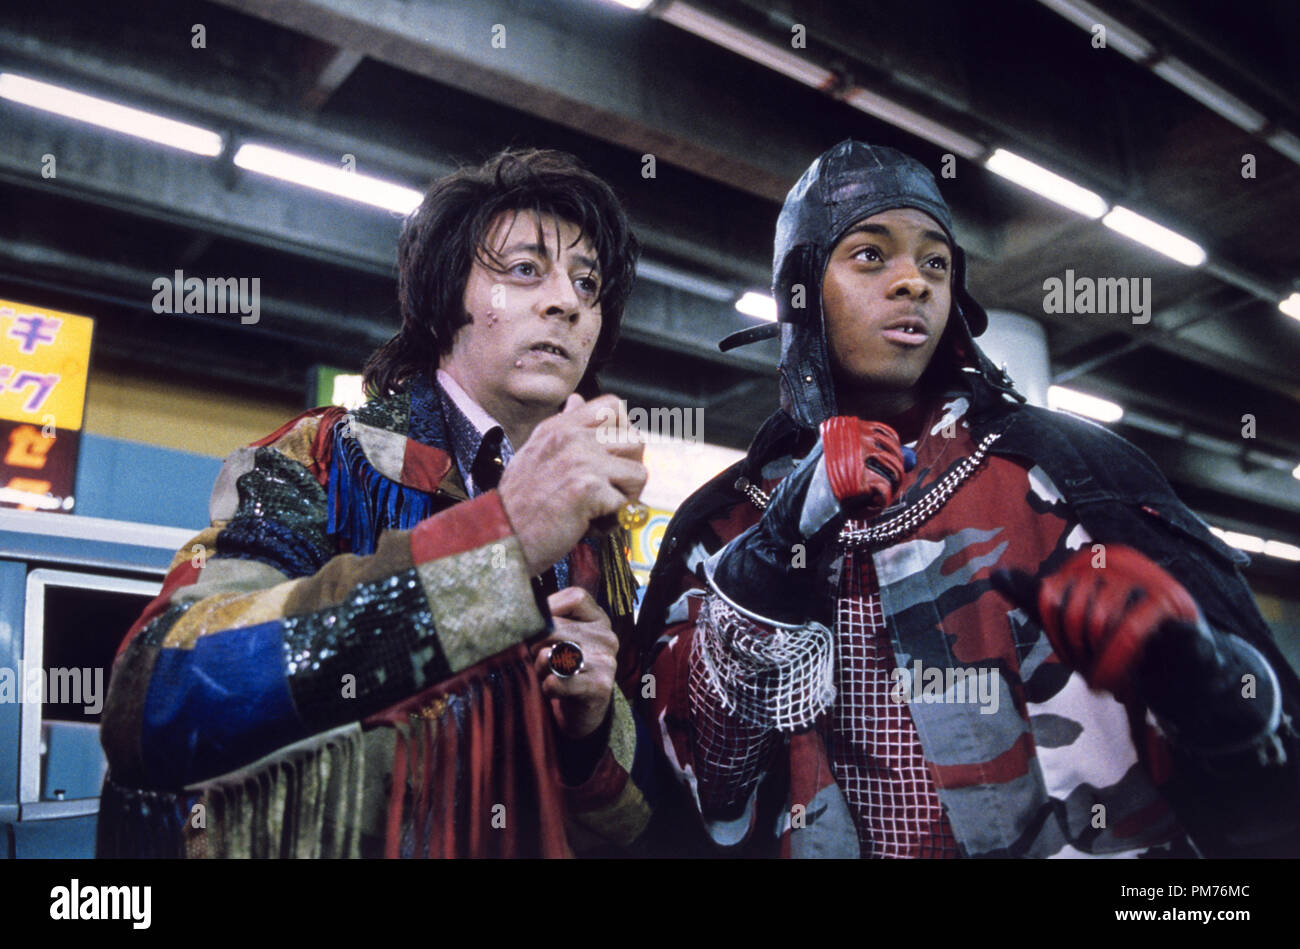 Film Still / Publicity Still from 'Mystery Men' Paul Reubens, Kel Mitchell © 1999 Universal Pictures Photo Credit: Melinda Sue Gordon   File Reference # 30973463THA  For Editorial Use Only -  All Rights Reserved Stock Photo